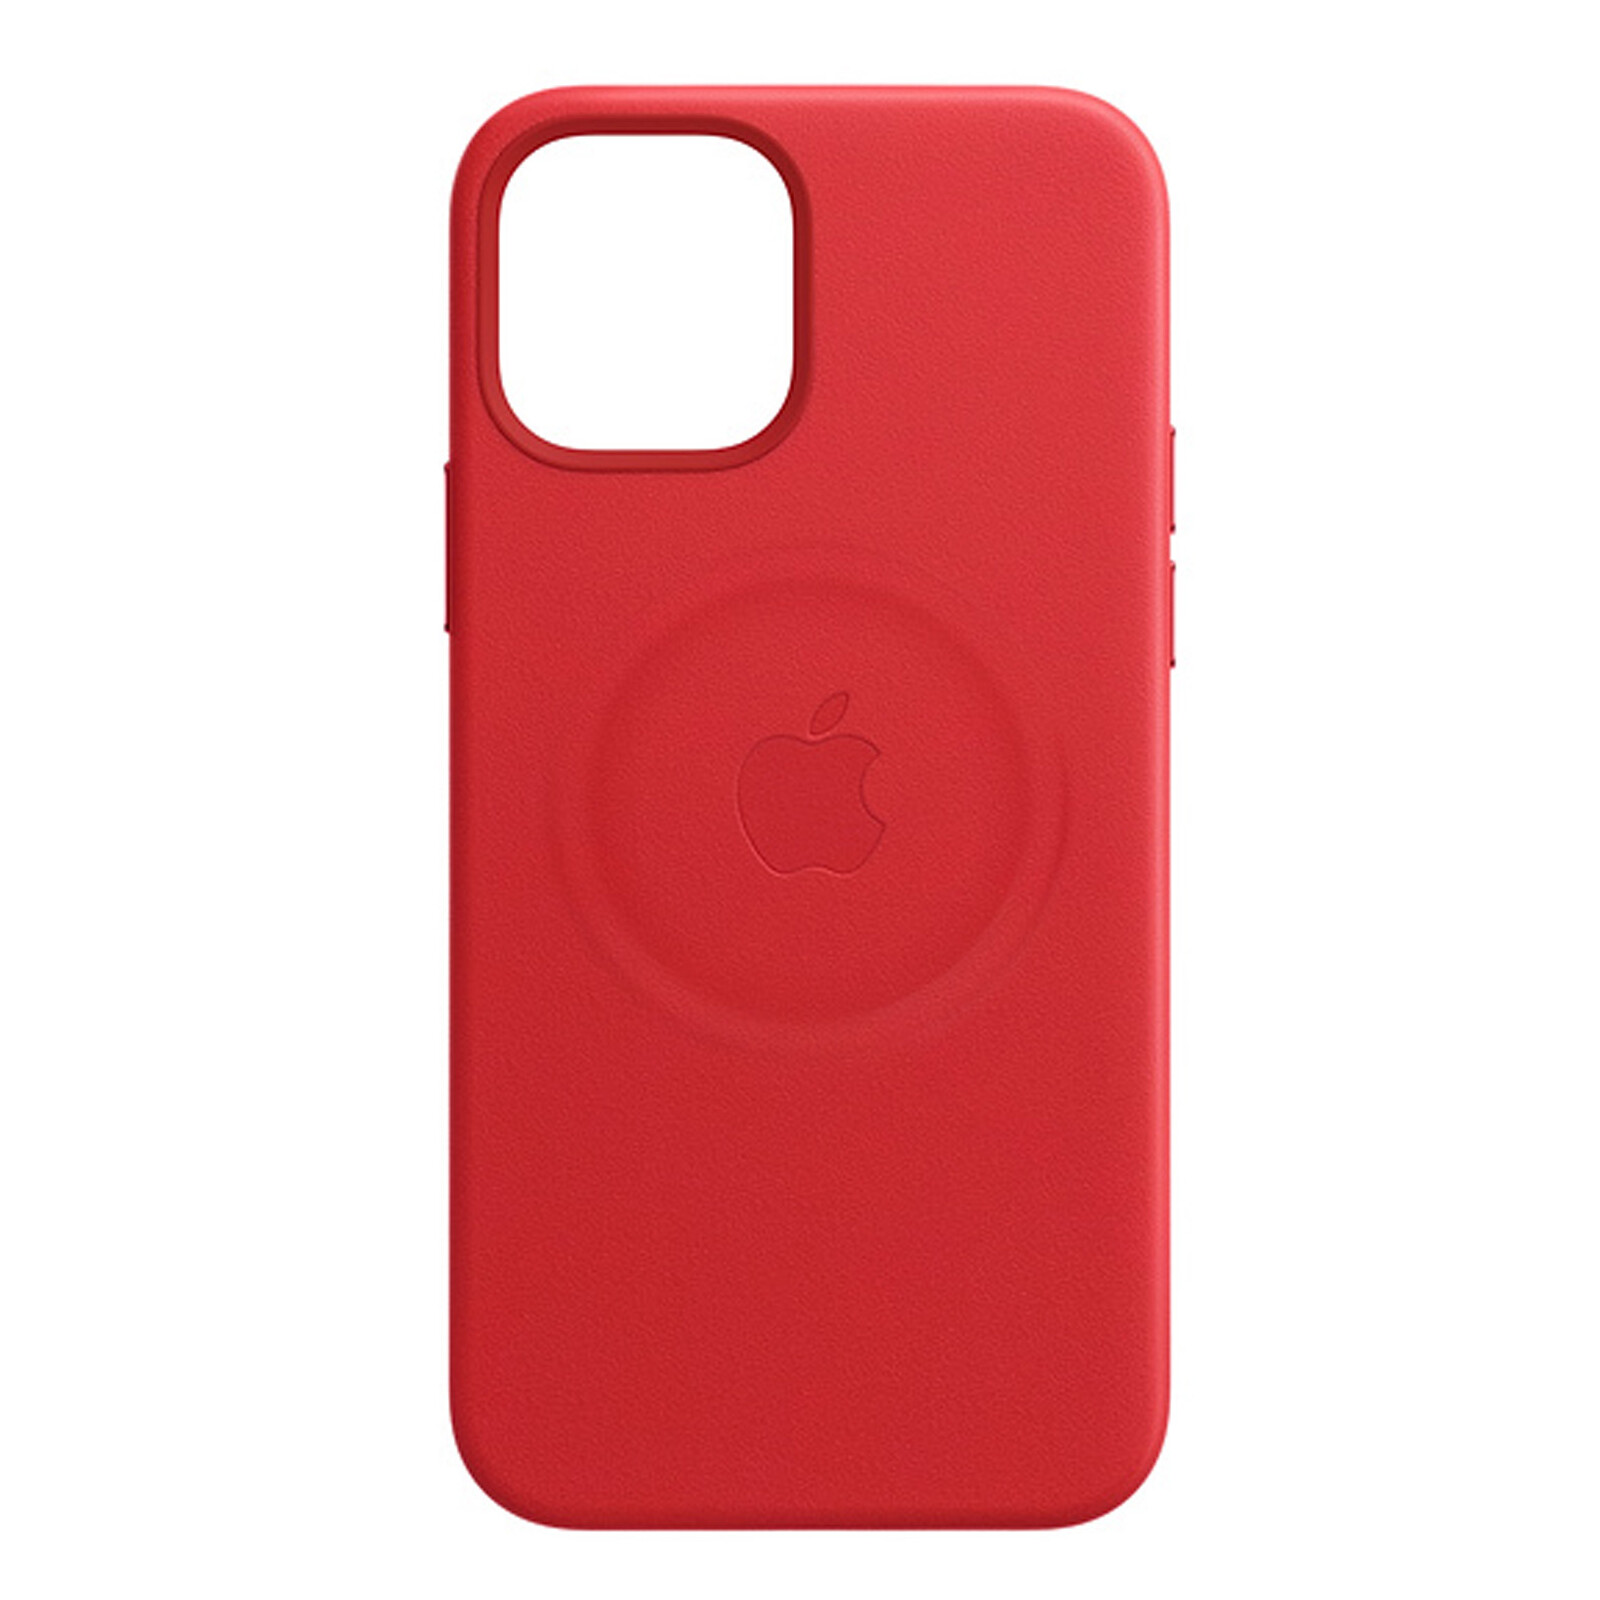 Apple iPhone 12/12 Pro Max Leder Case mit MagSafe productred